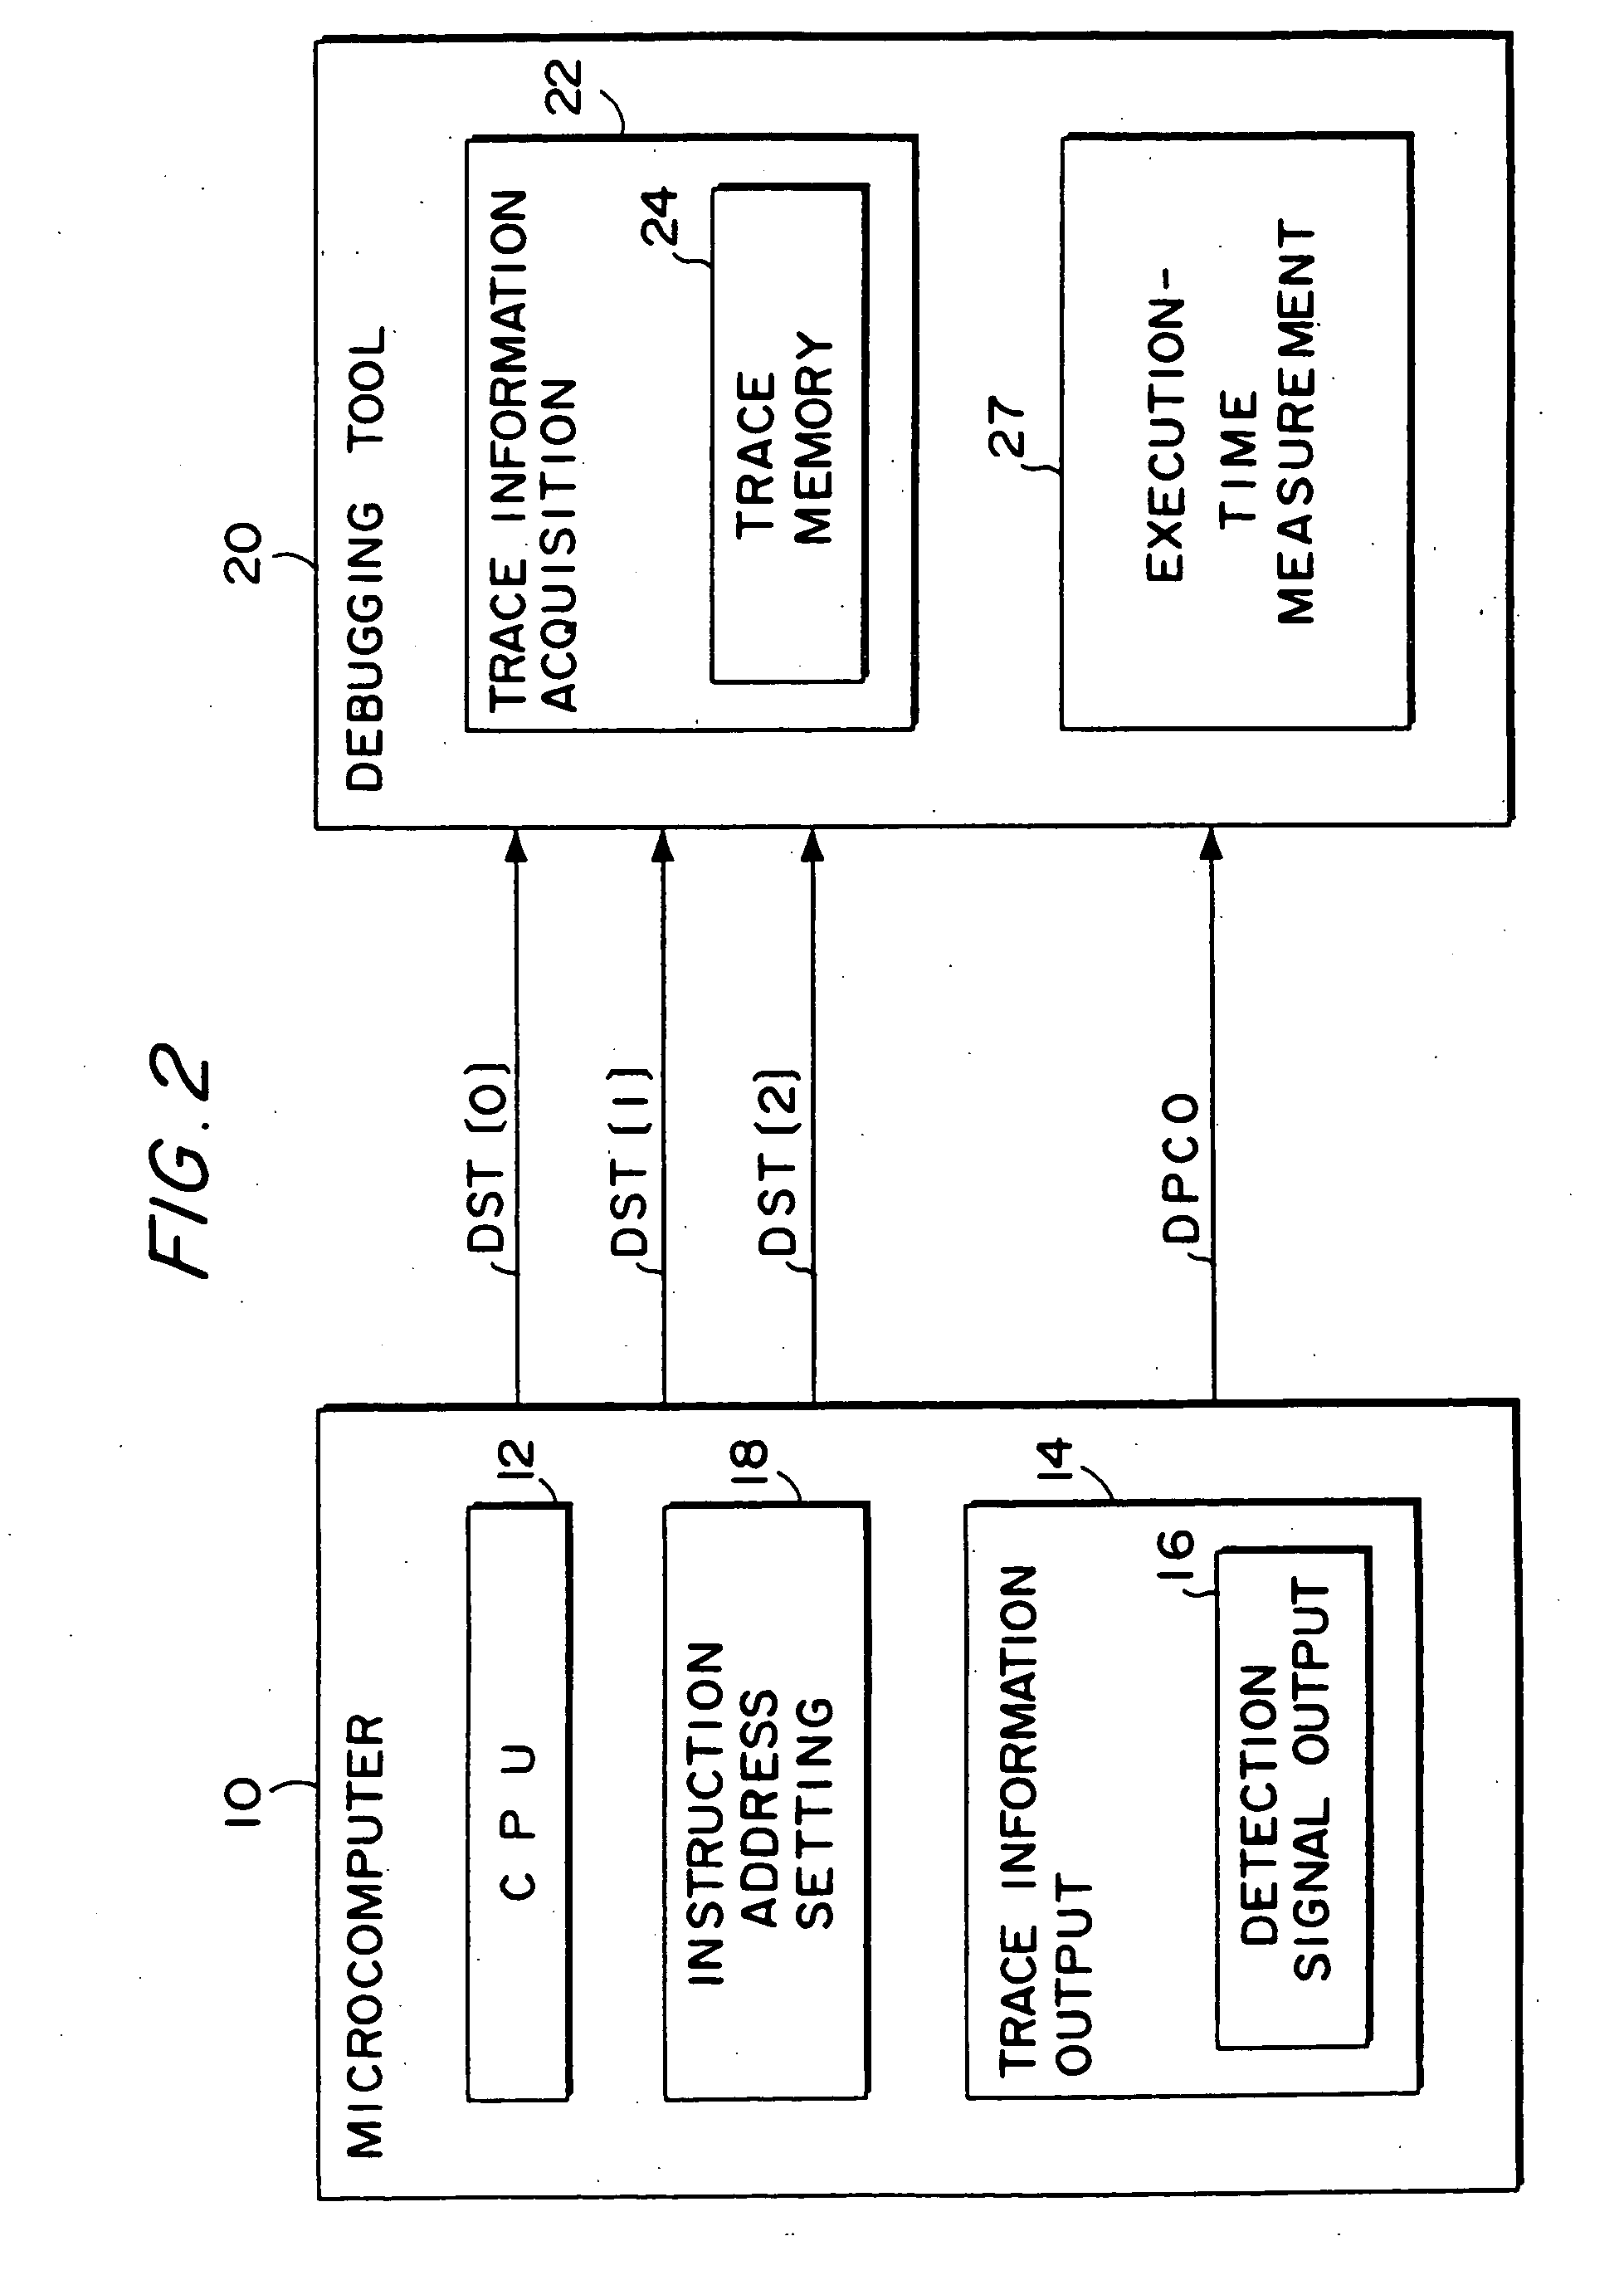 Microcomputer, electronic equipment, and debugging system